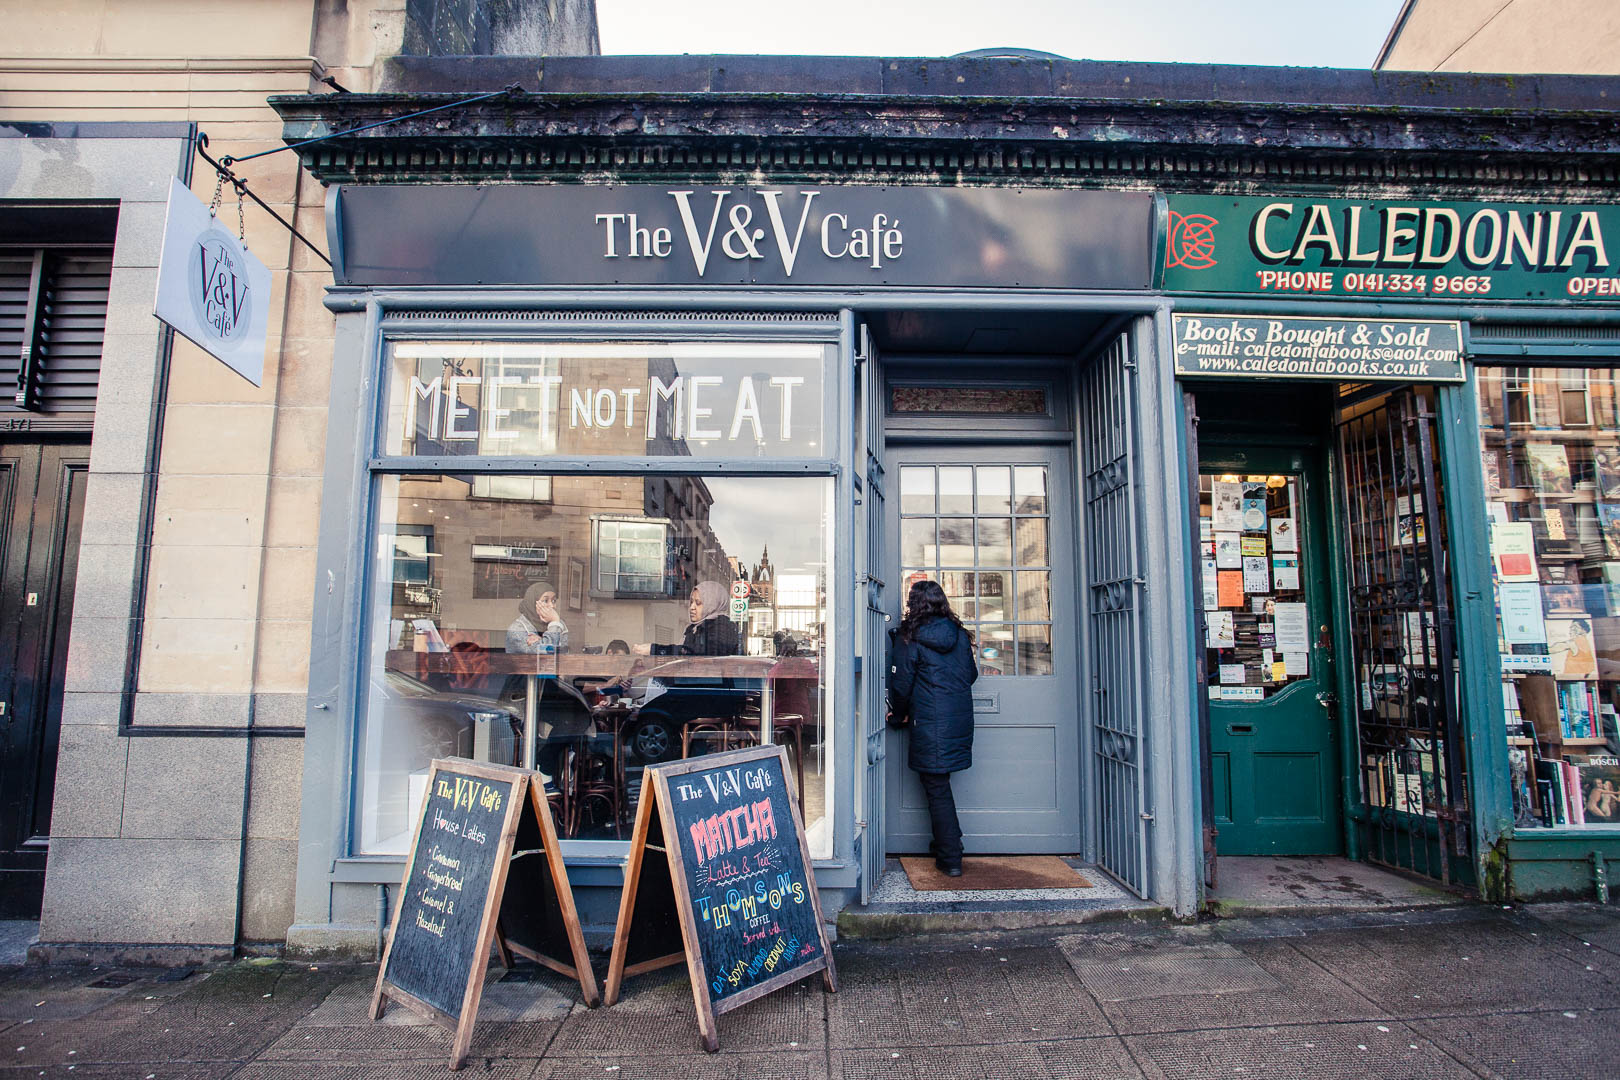 The V&V Cafe is a fully vegan cafe in the West End of Glasgow. With a range of breakfast and lunch items, a great selection vegan cakes and a varied takeaway and retail offer, the V&V Cafe Glasgow has quickly become a favourite among locals and students of the area alike!